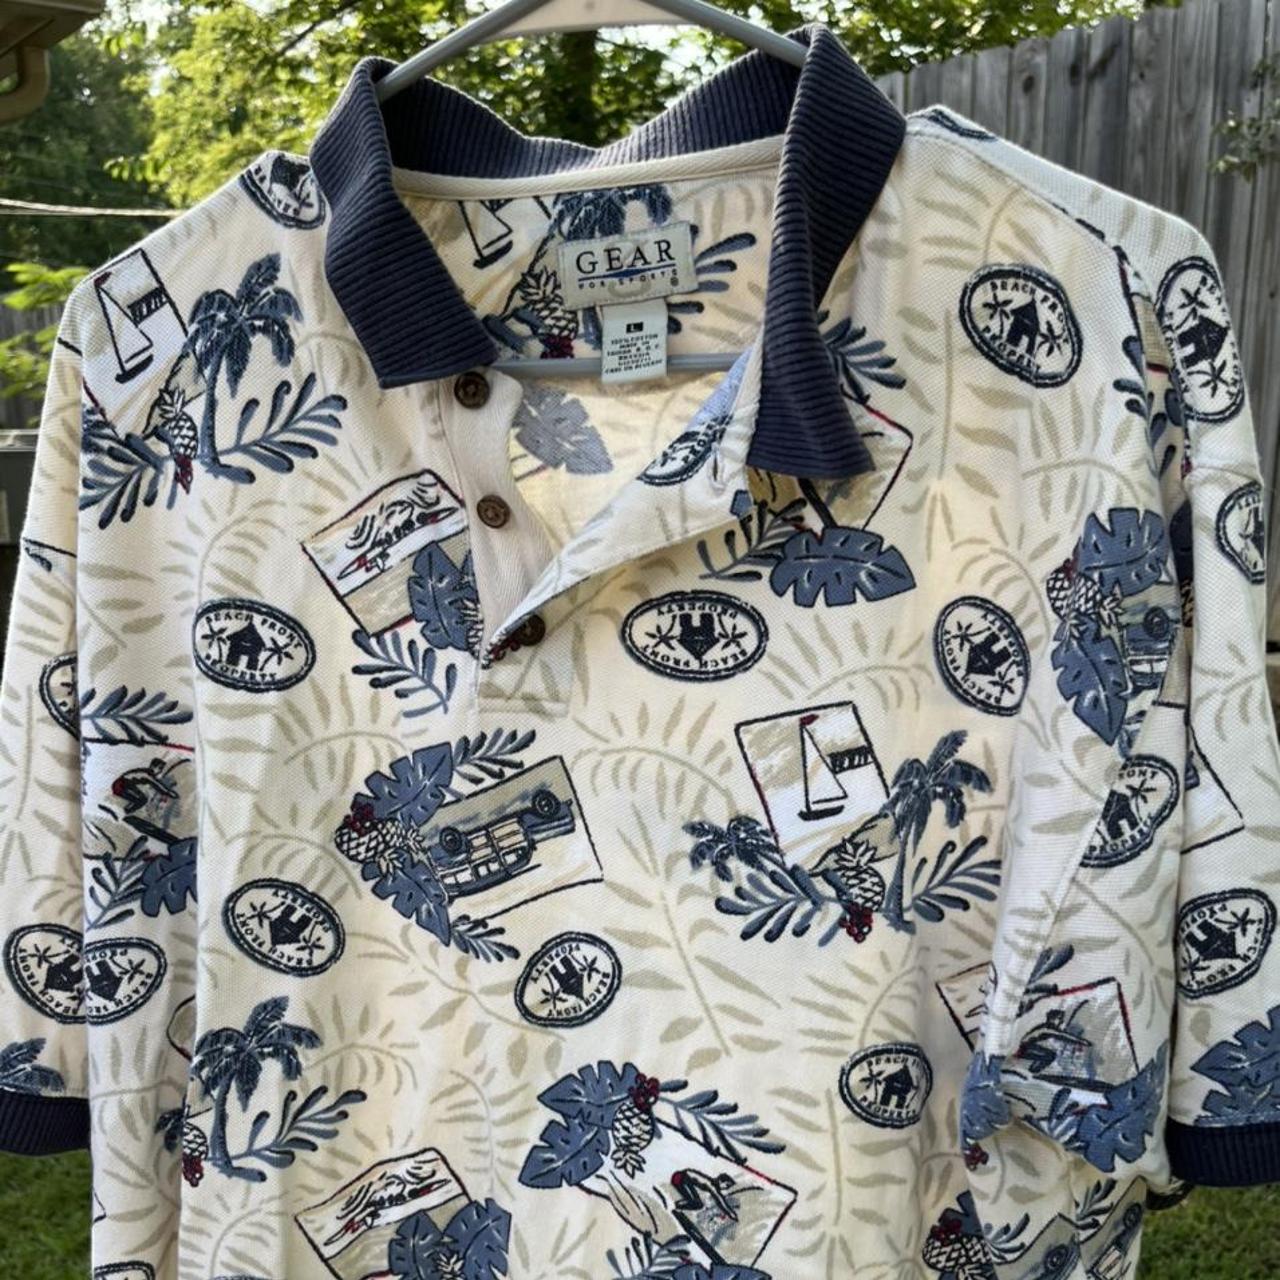 Product Image 1 - Very cool and hippie men’s